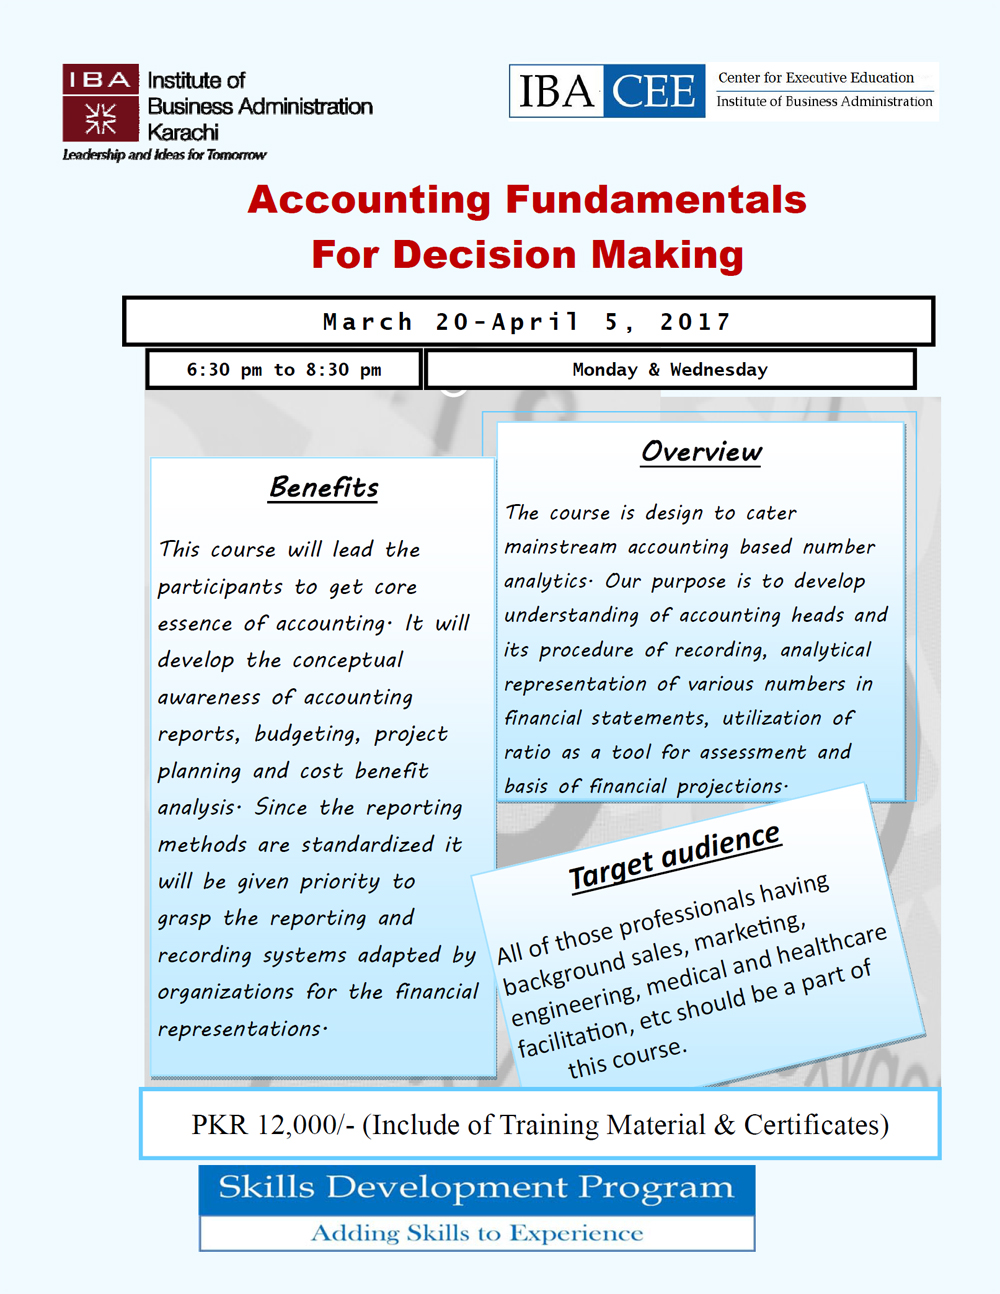 Accounting Fundamentals For Decision Making